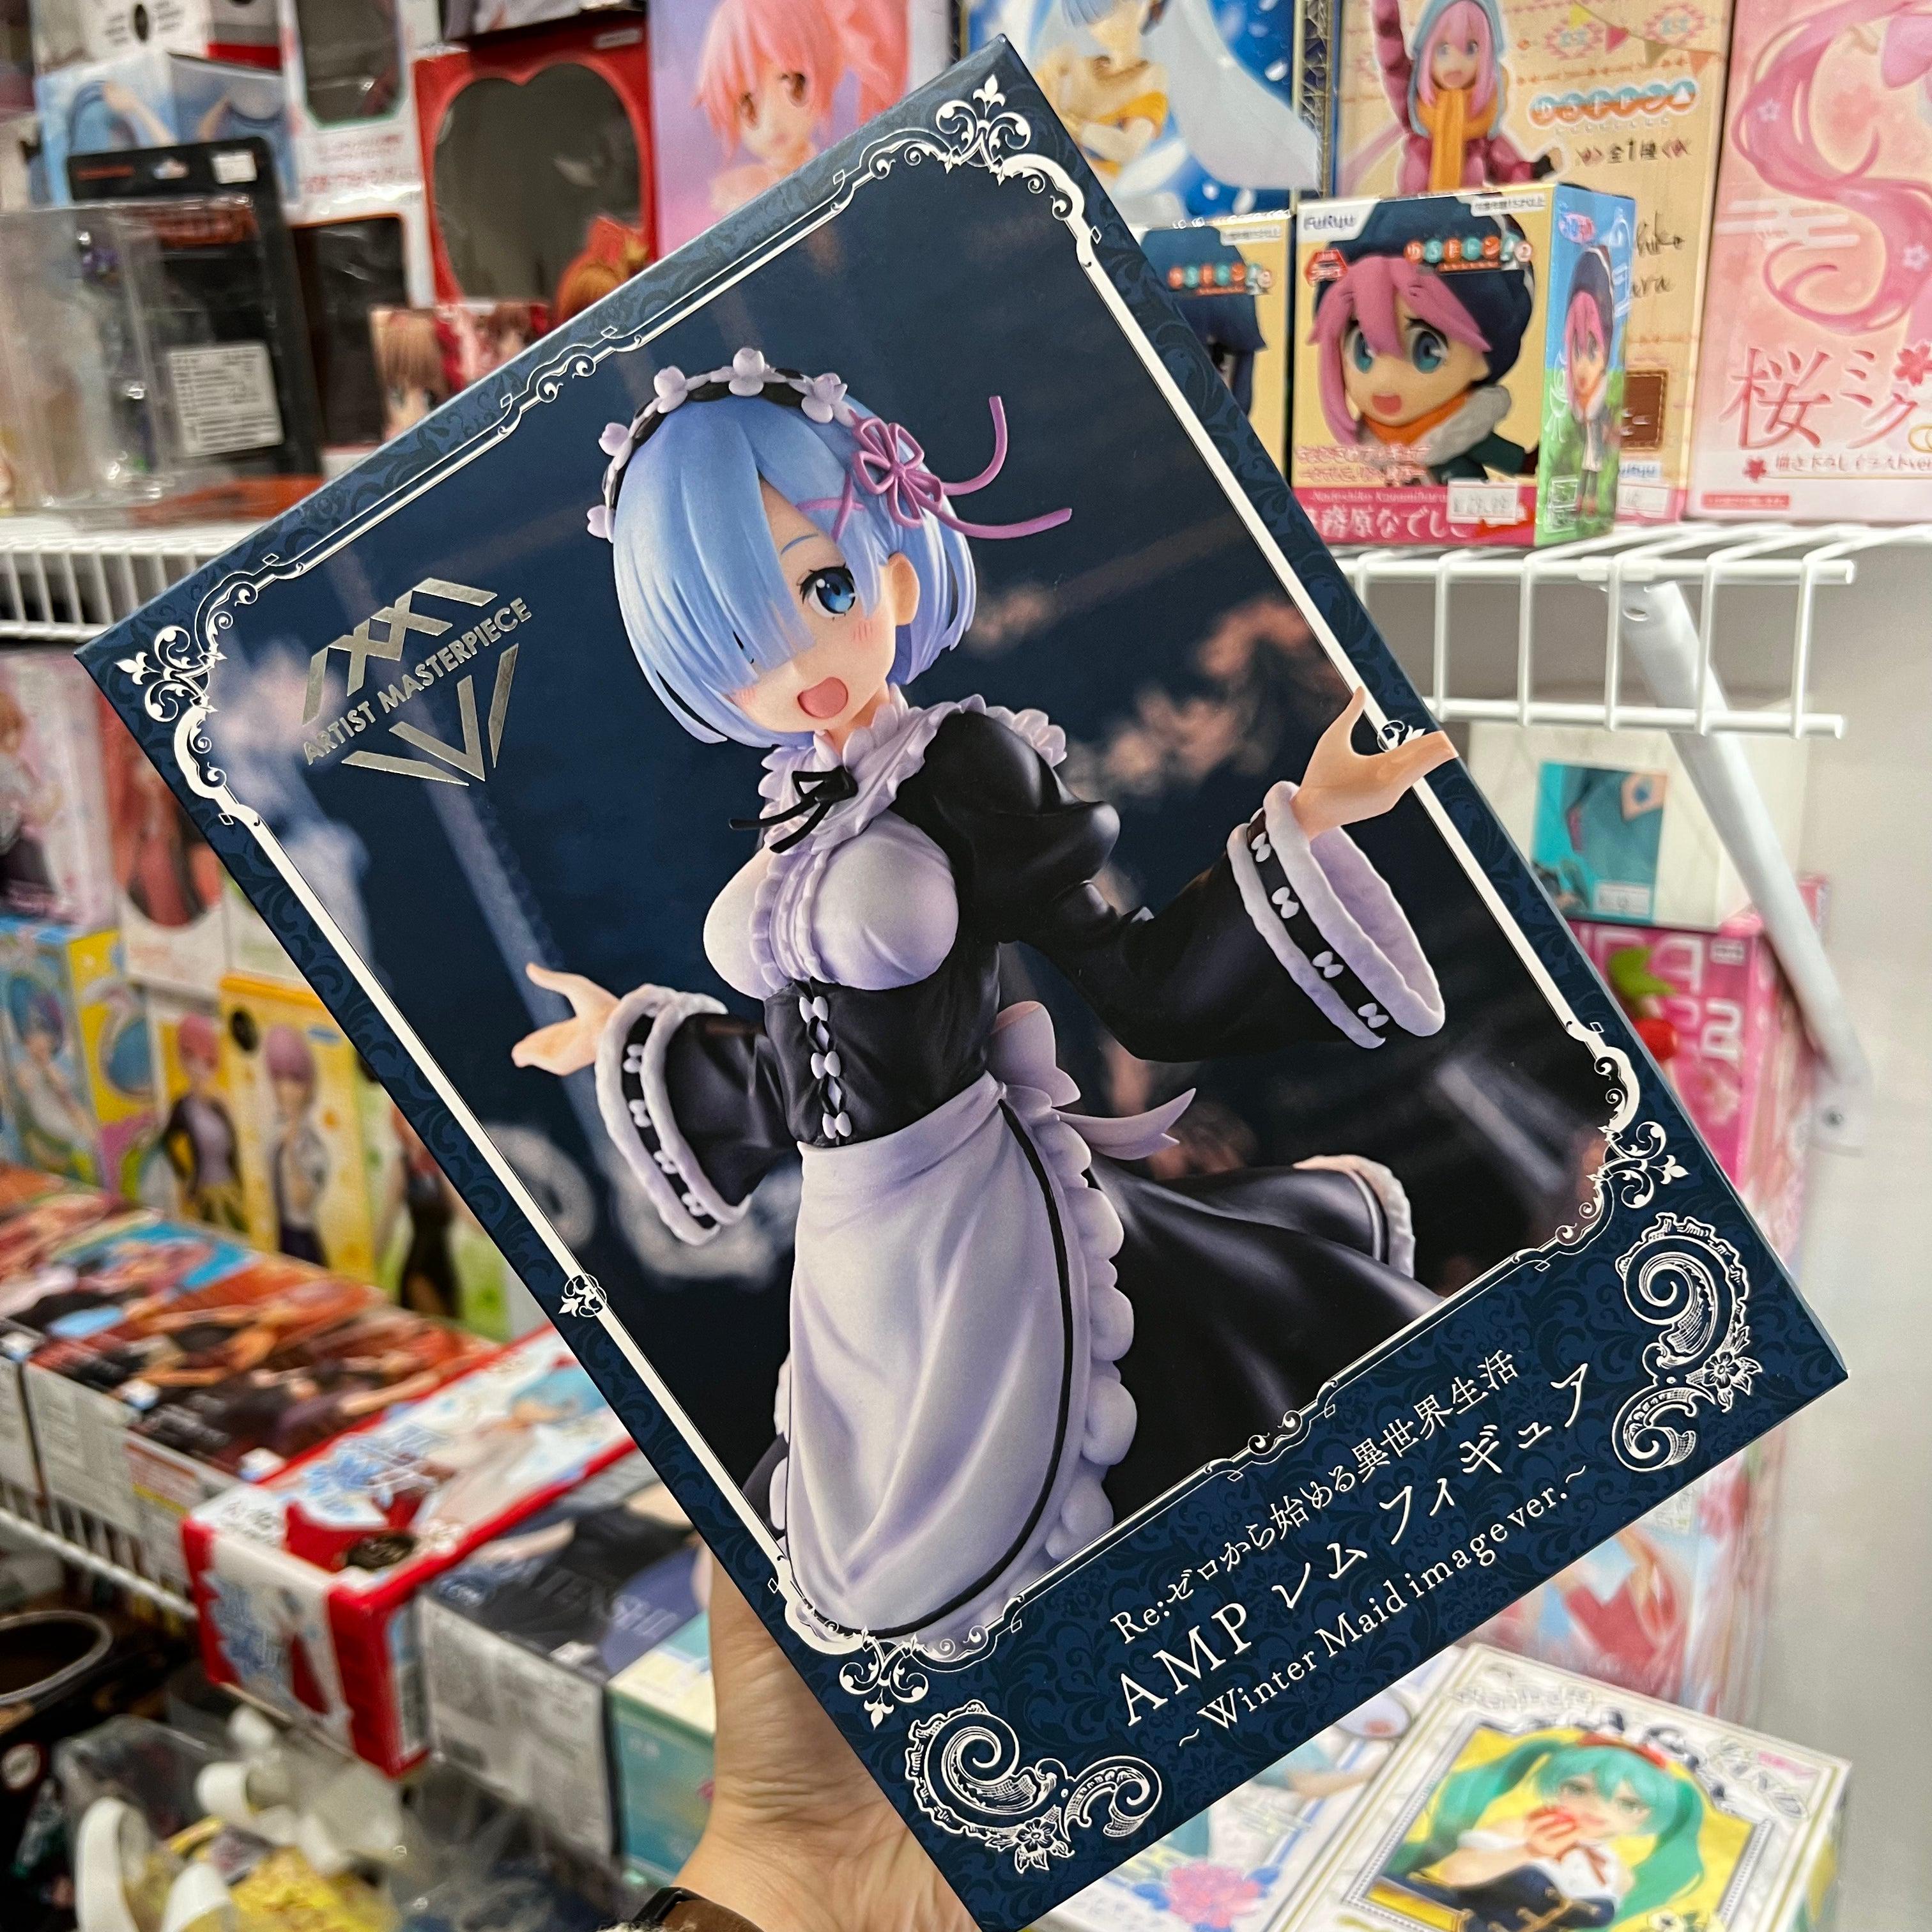  Taito Re:Zero Winter Maid Rem - Colorful Anime PVC Doll -  ARTIST MASTERPIECE, 8 Tall : Toys & Games